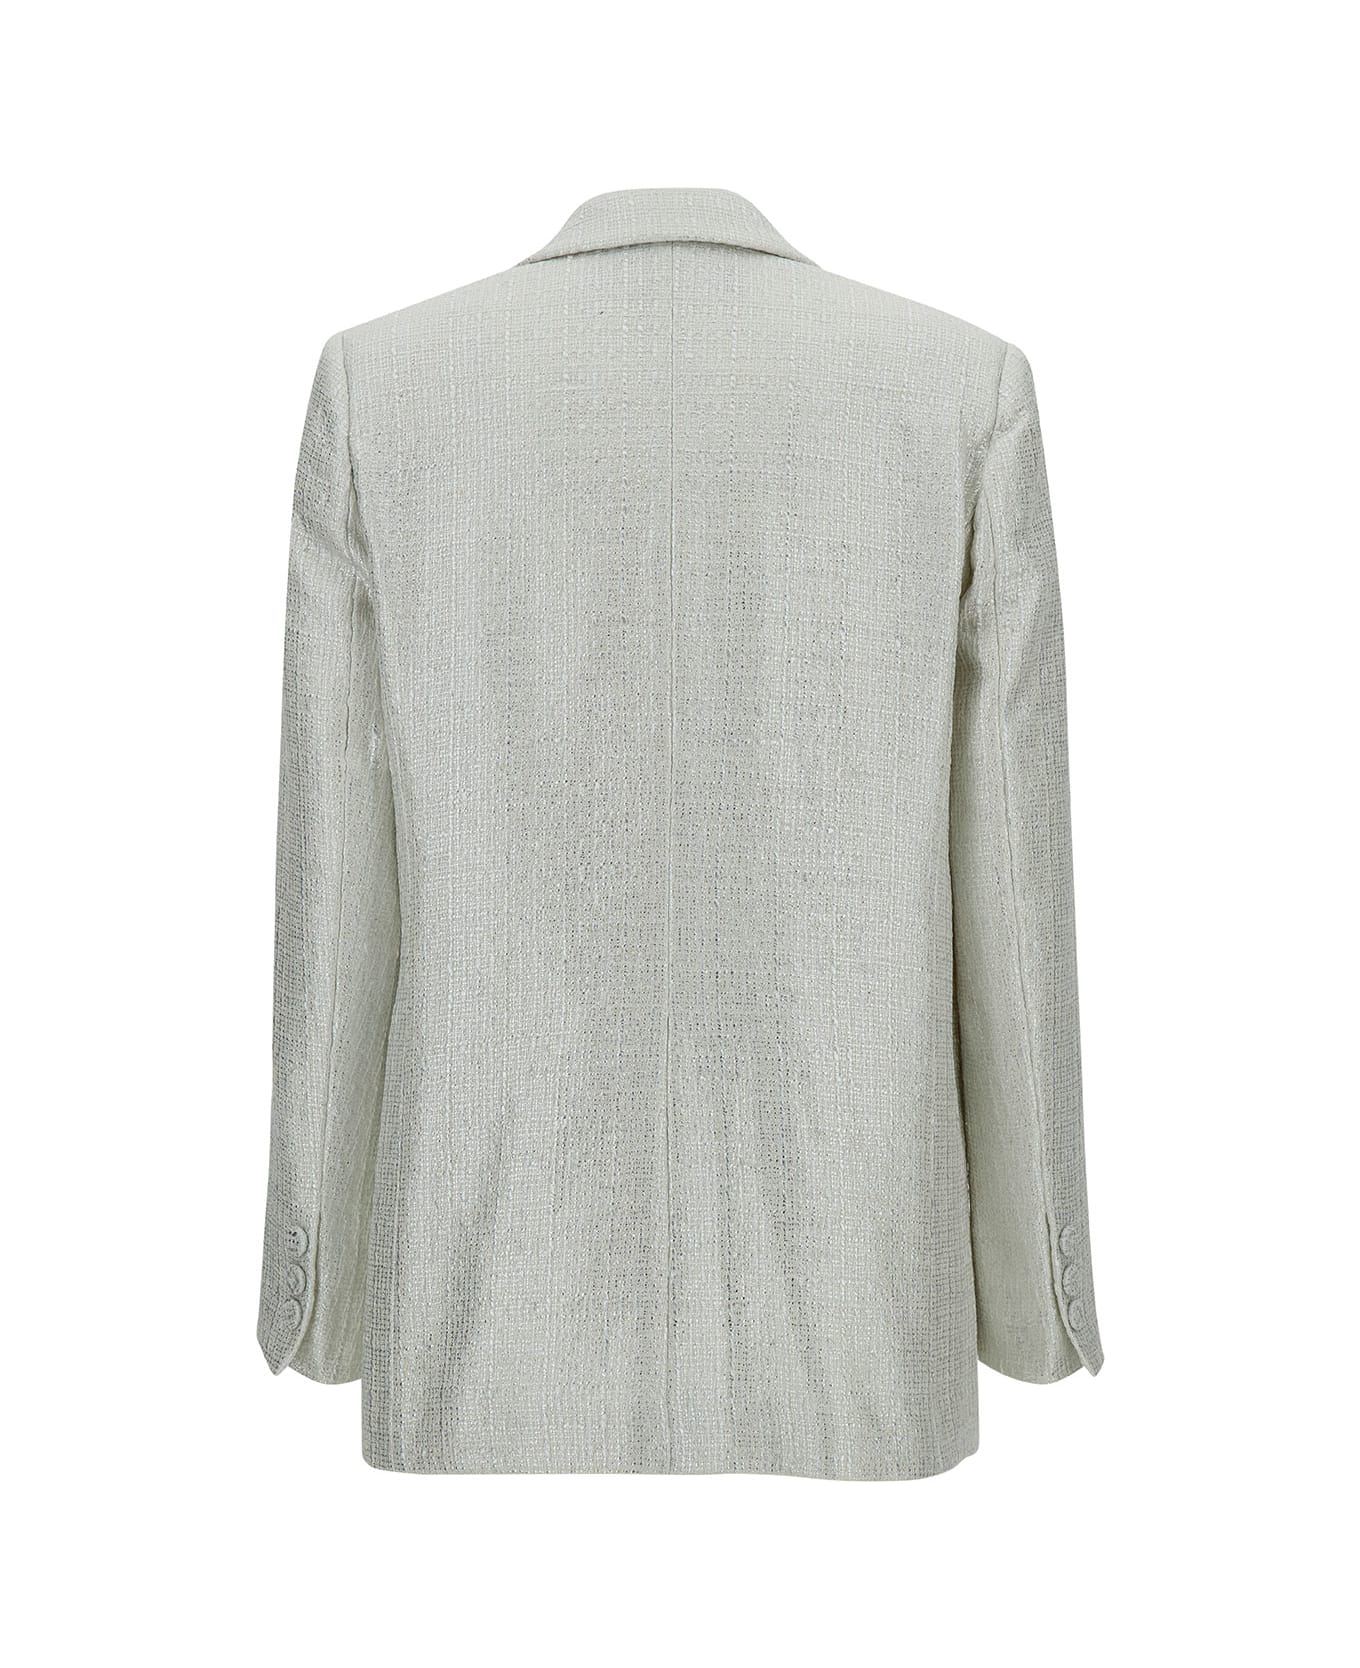 Federica Tosi Silver Single-breasted Jacket With A Single Button In Cotton Blend Man - Metallic ブレザー